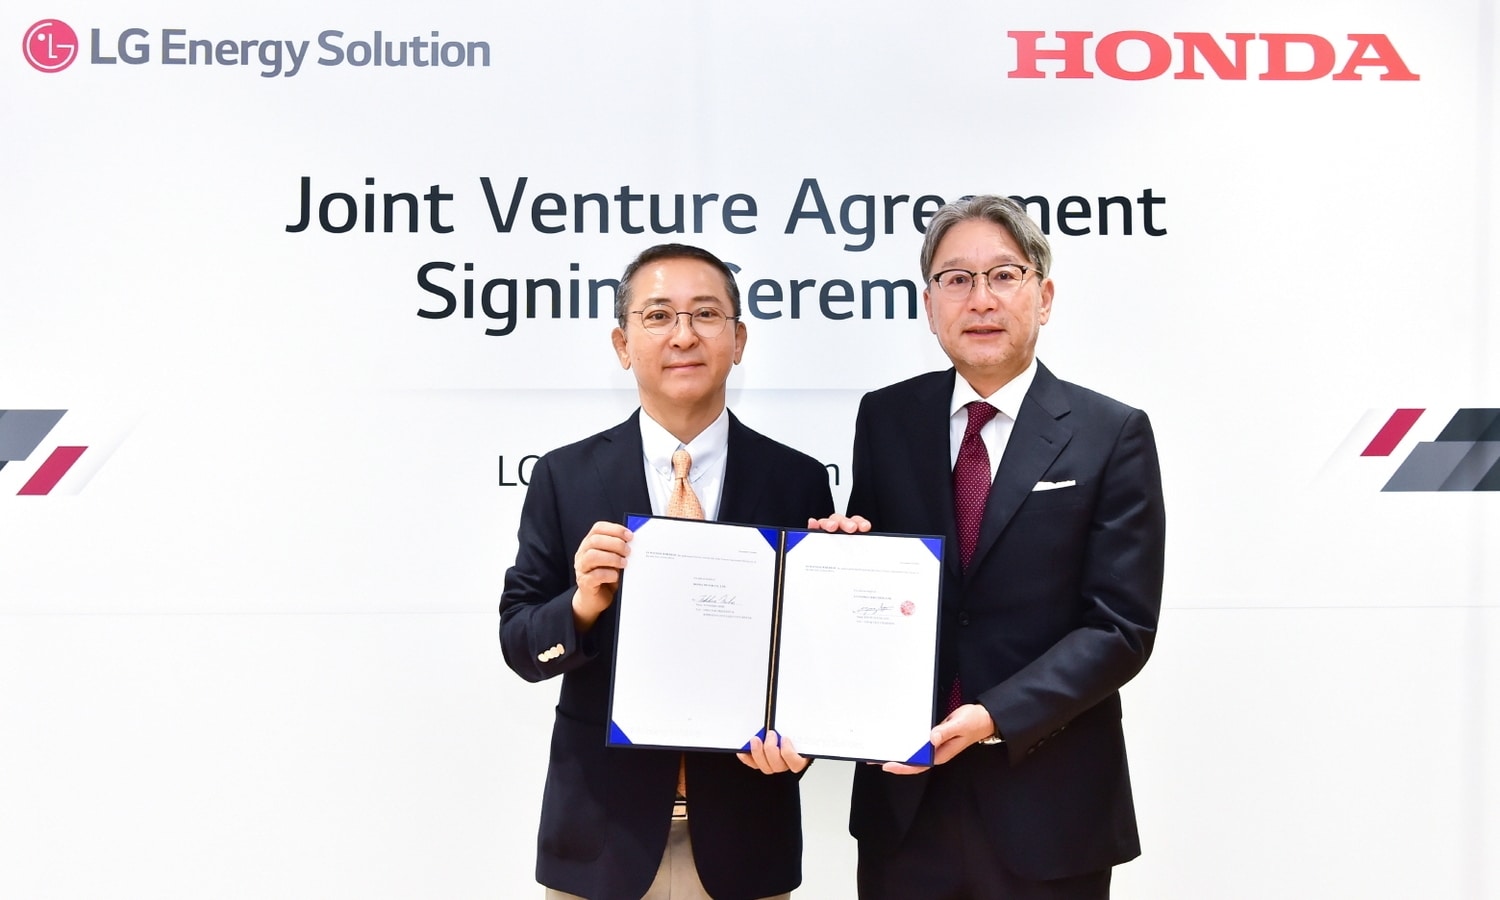 Youngsoo Kwon, CEO of LG Energy Solution, and Toshihiro Mibe, President, CEO and Representative Director of Honda Motor Company